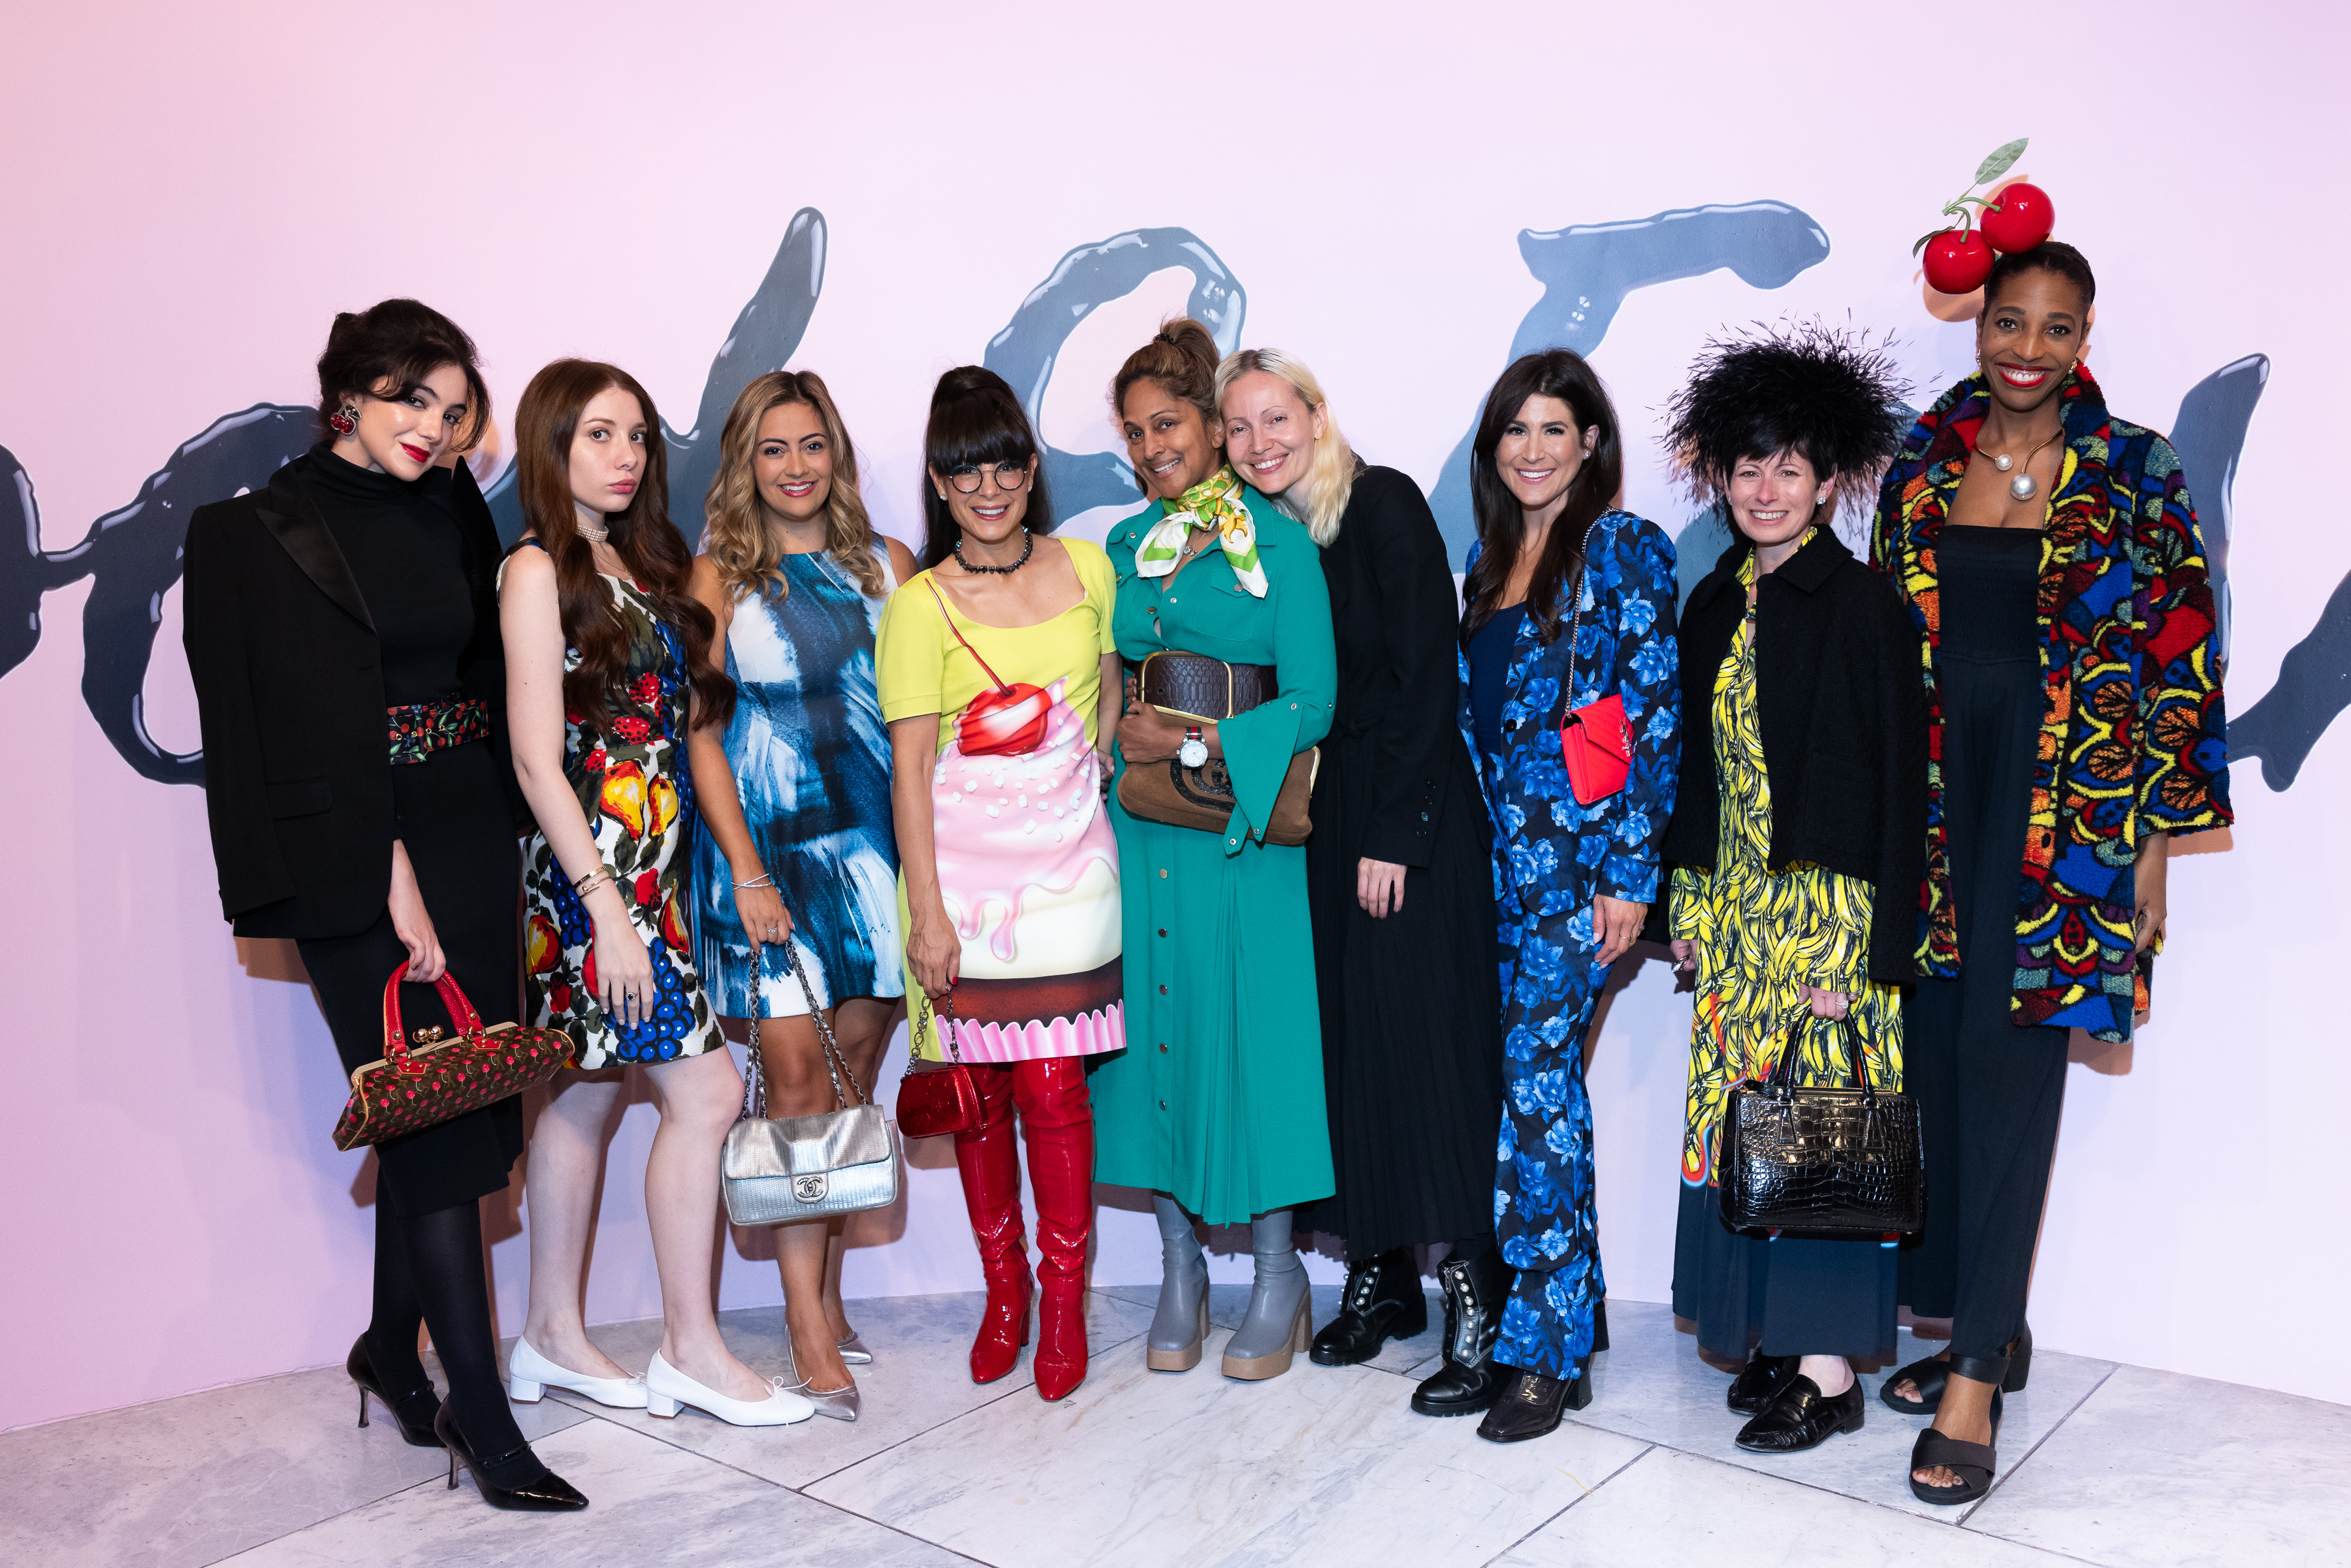 couture council young patrons posing in front of the food and fashion exhibition wall graphic